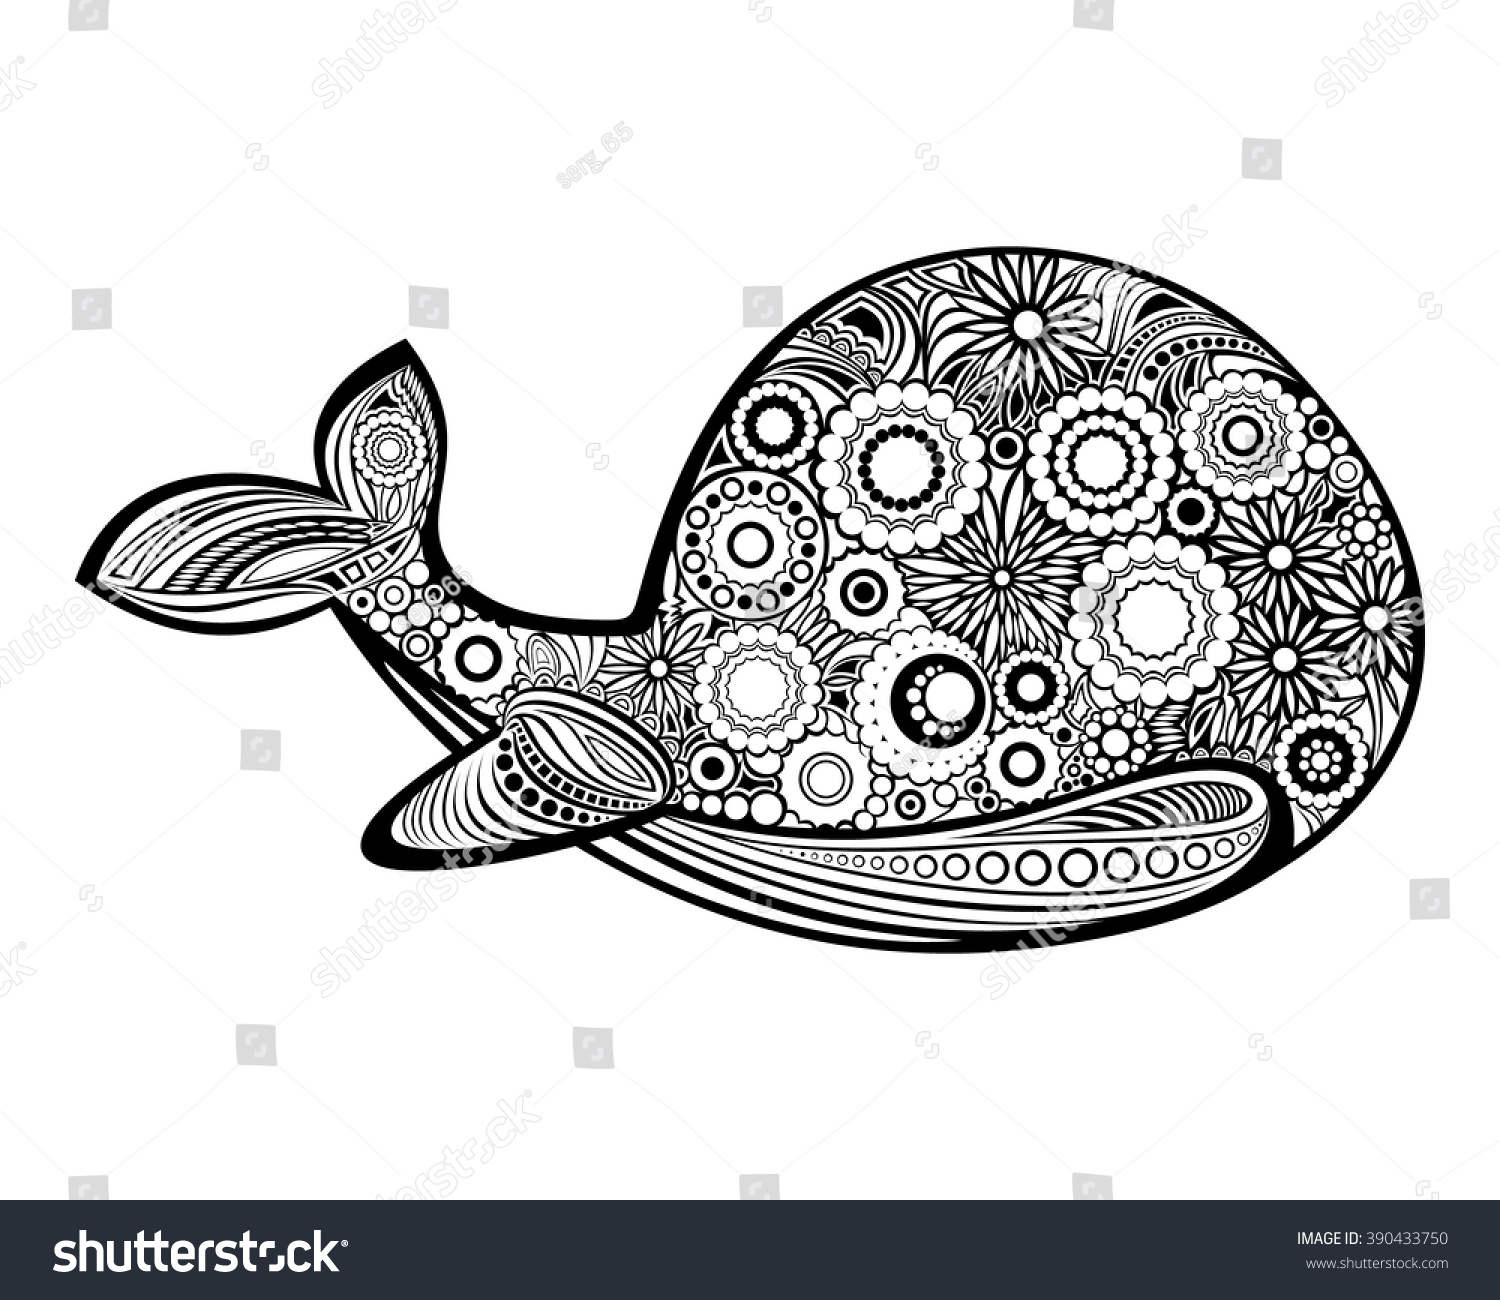 Whale for anti stress coloring pages and adult coloring books Ornamental tribal patterned whale